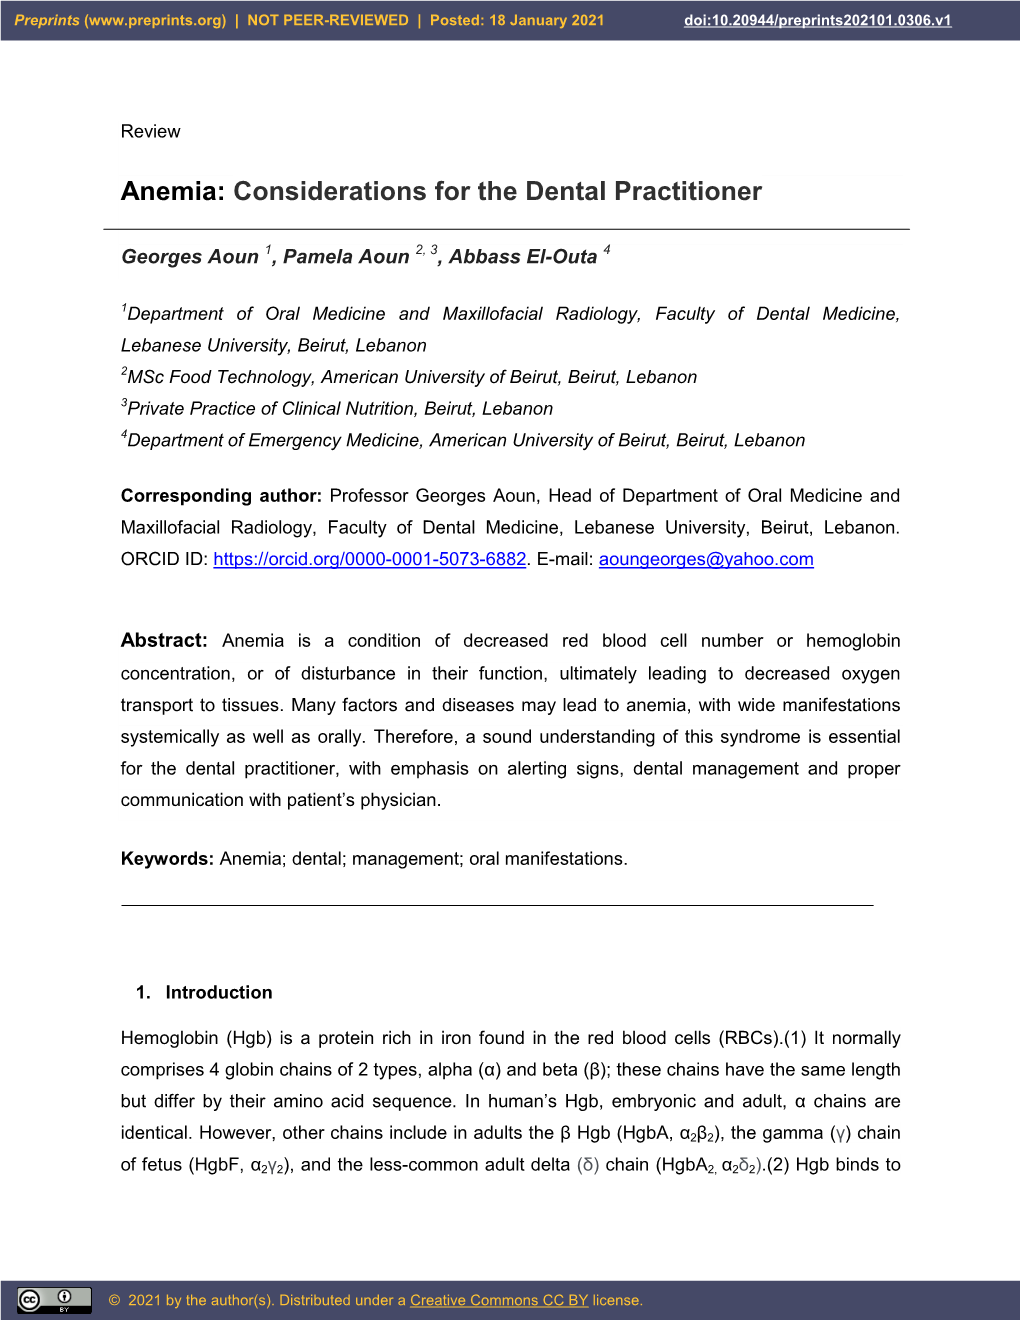 Anemia: Considerations for the Dental Practitioner